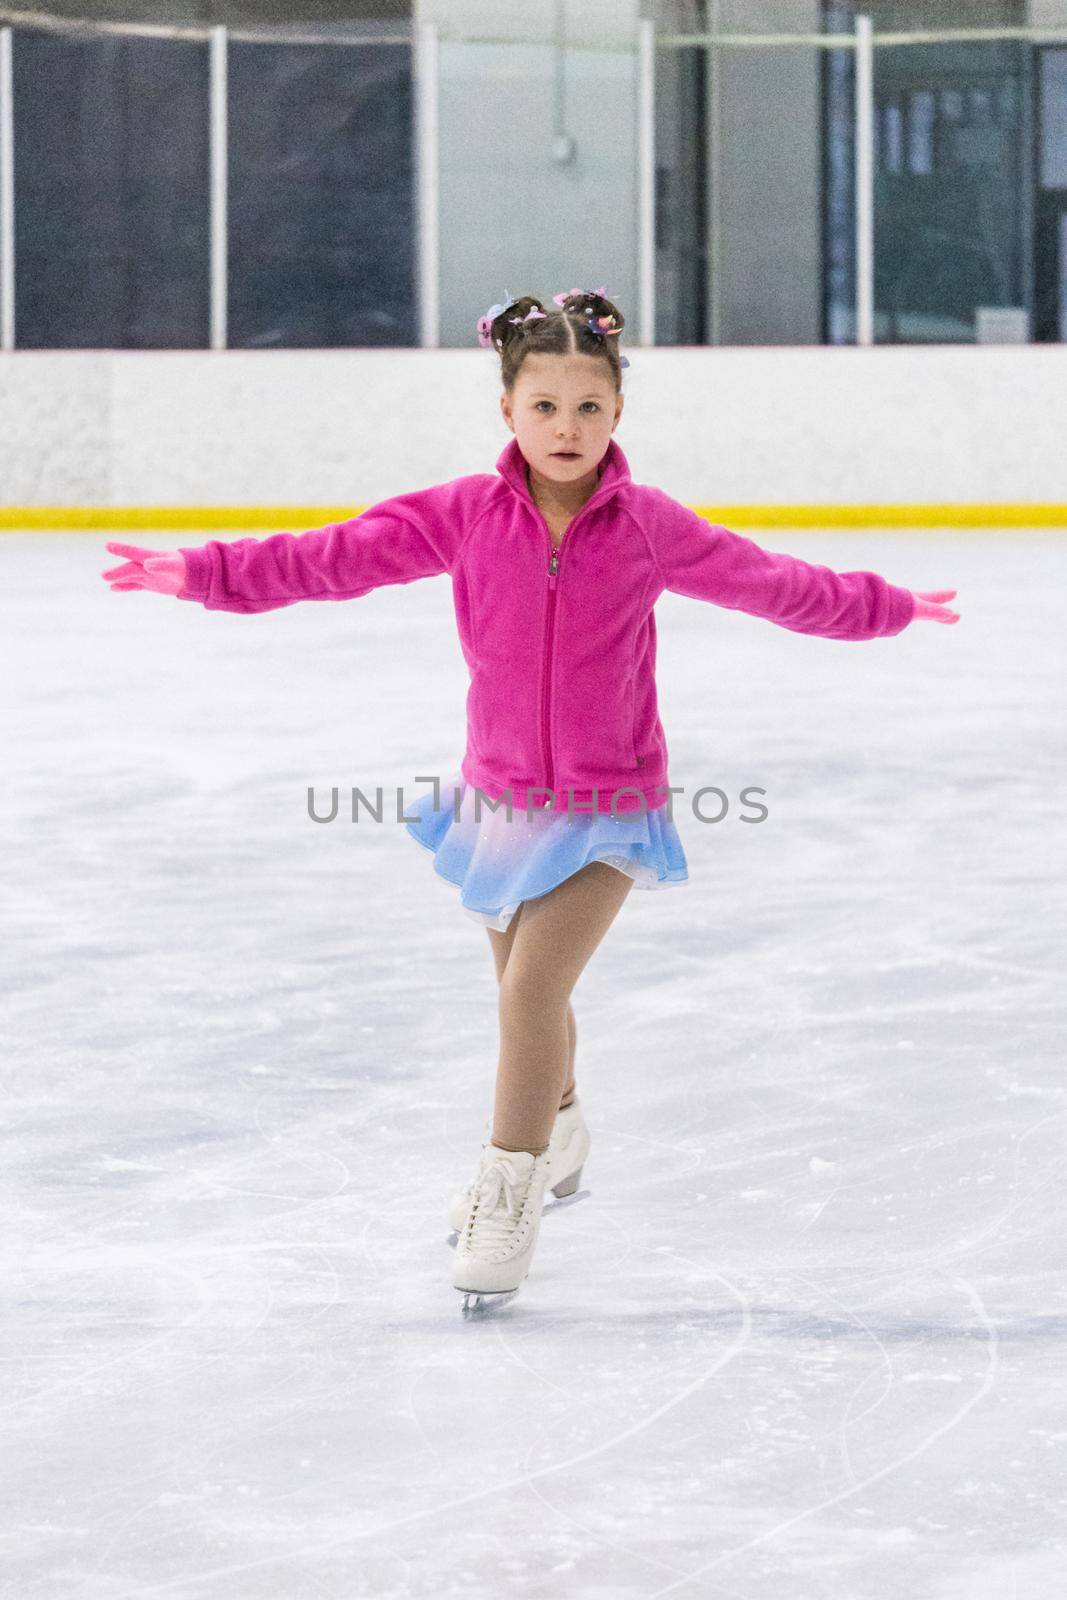 Little girl practicing figure skating on an indoor ice rink.